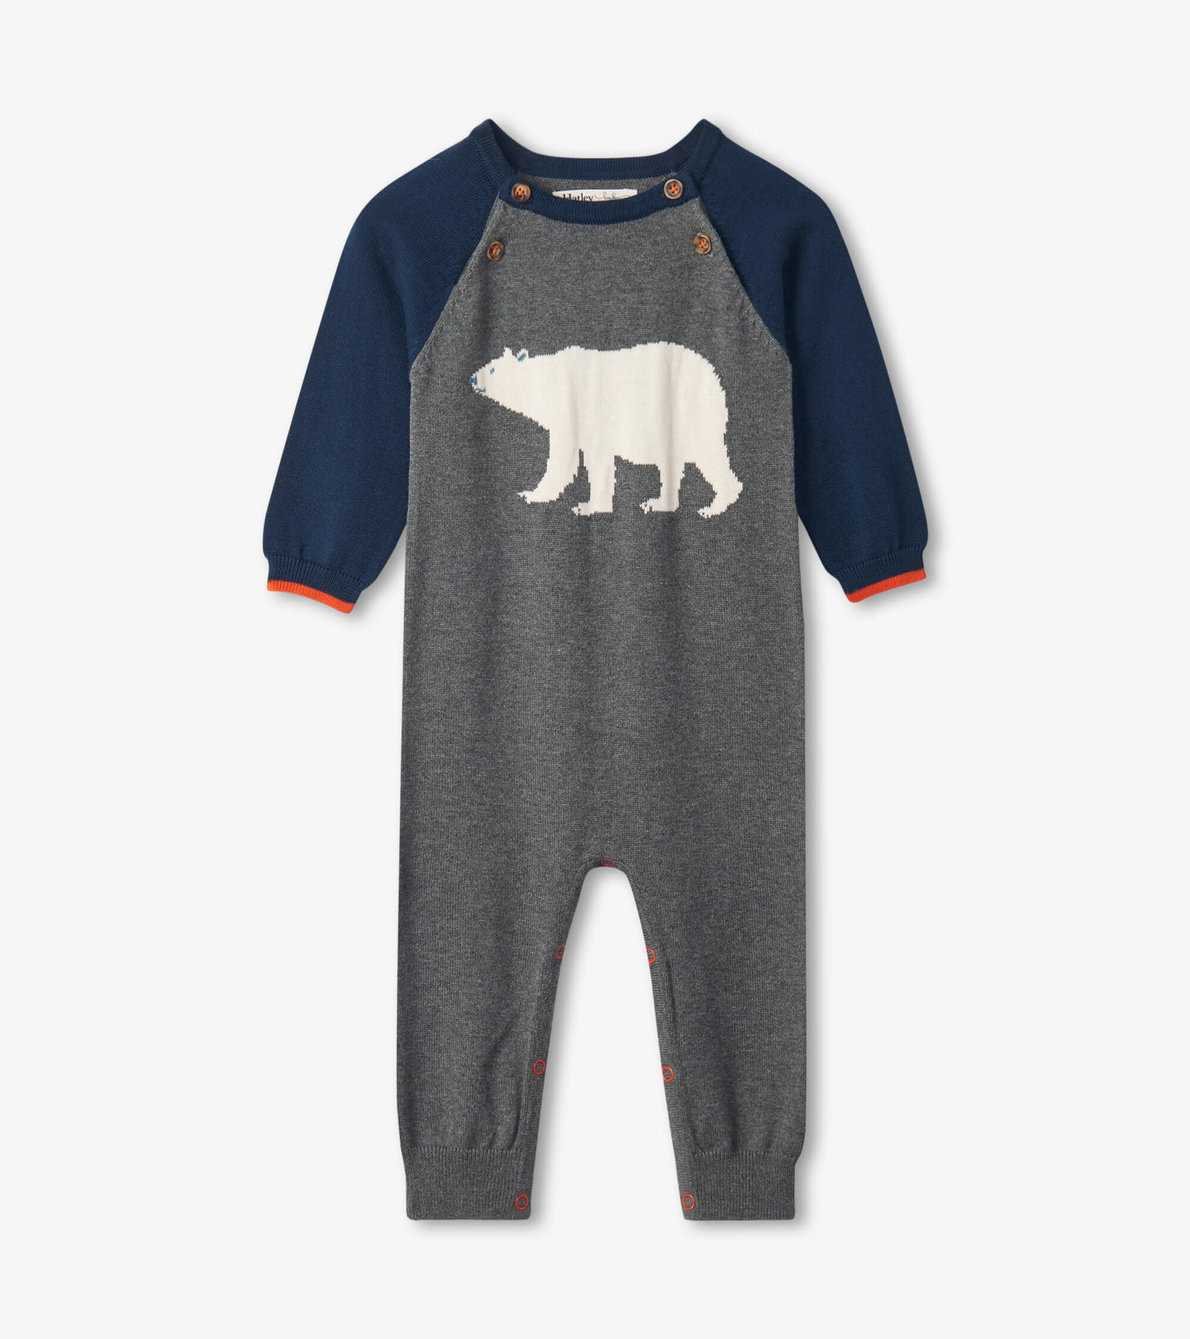 View larger image of Bear Cub Baby Sweater Romper